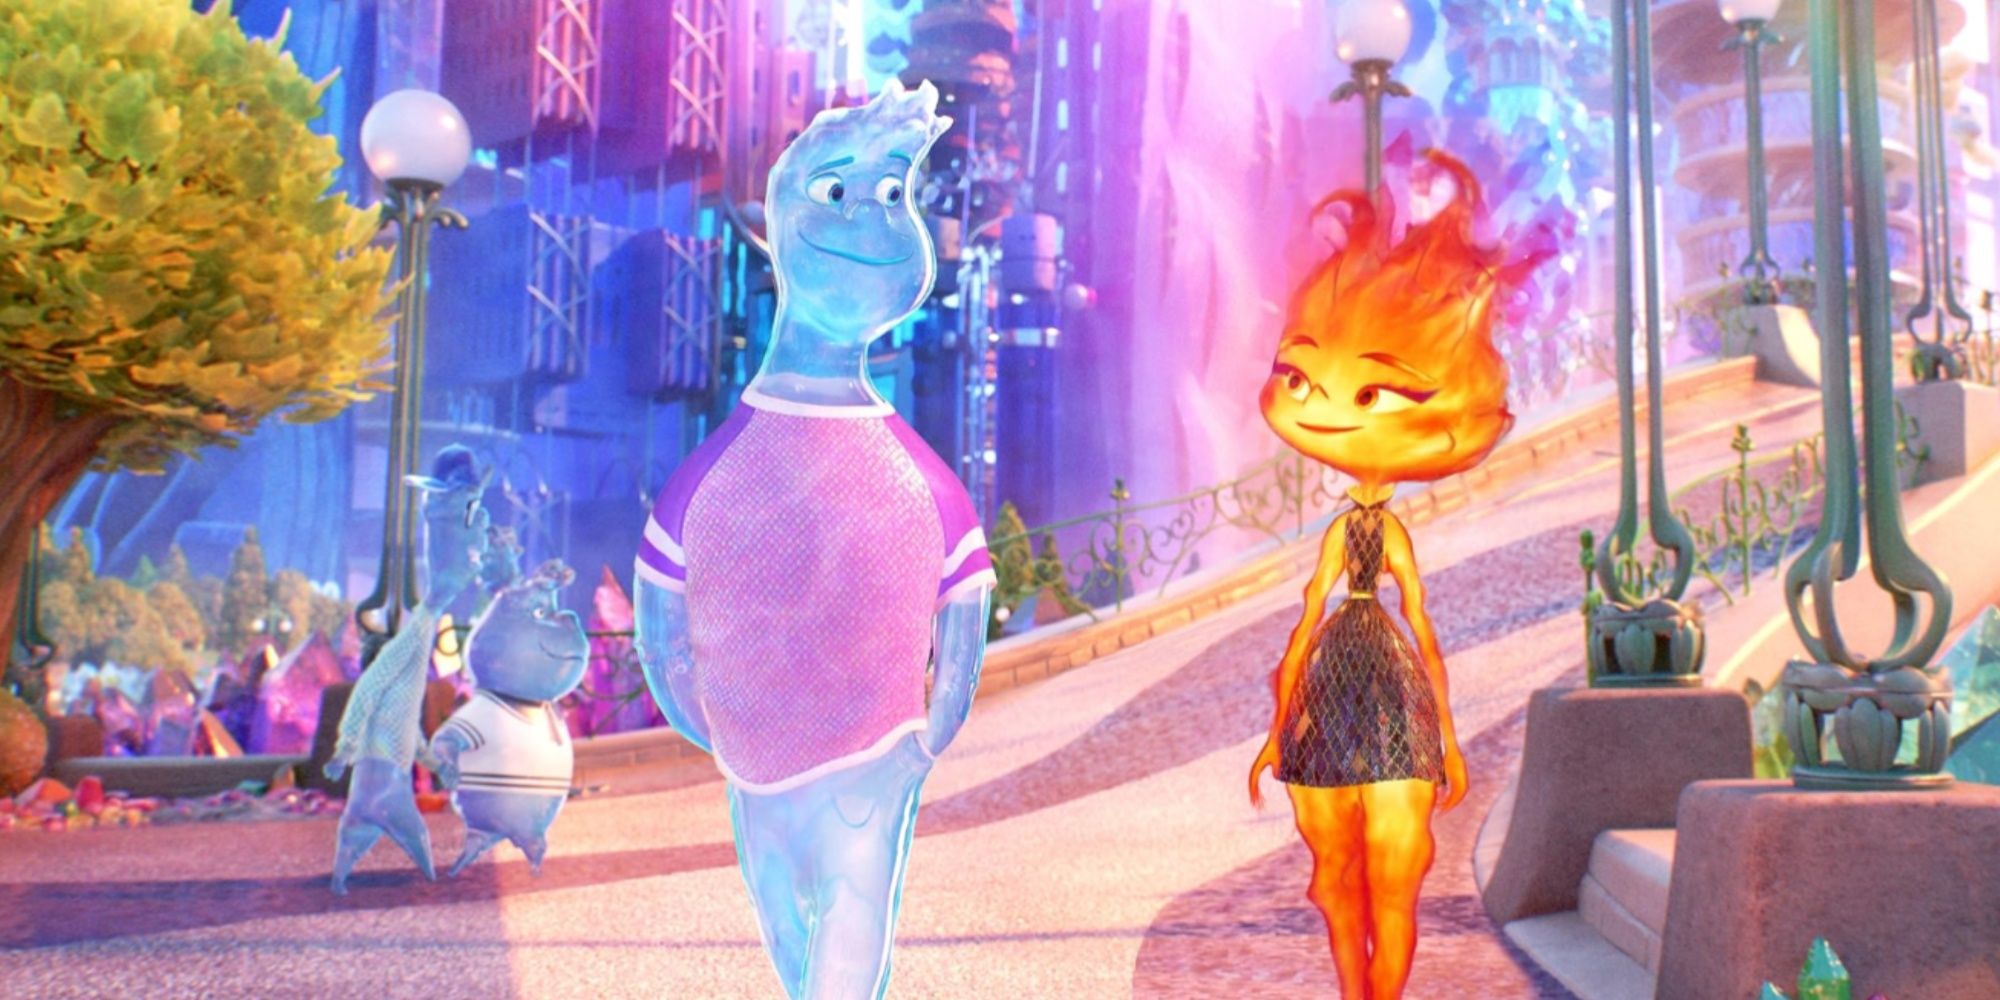 Wade and Ember looking at each other as they walk along a path in the vibrant Element City, with more water element characters behind them.